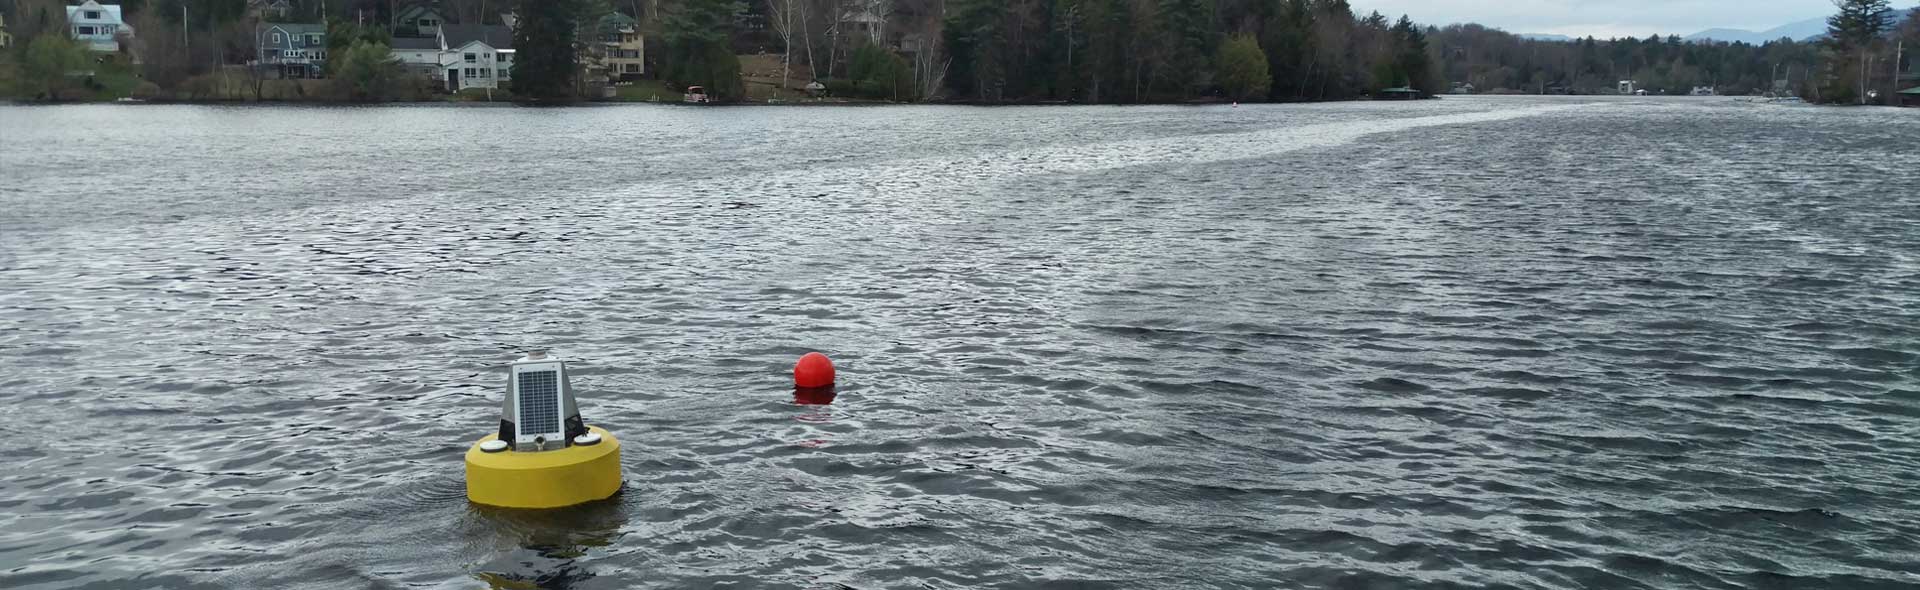 Limnology buoy